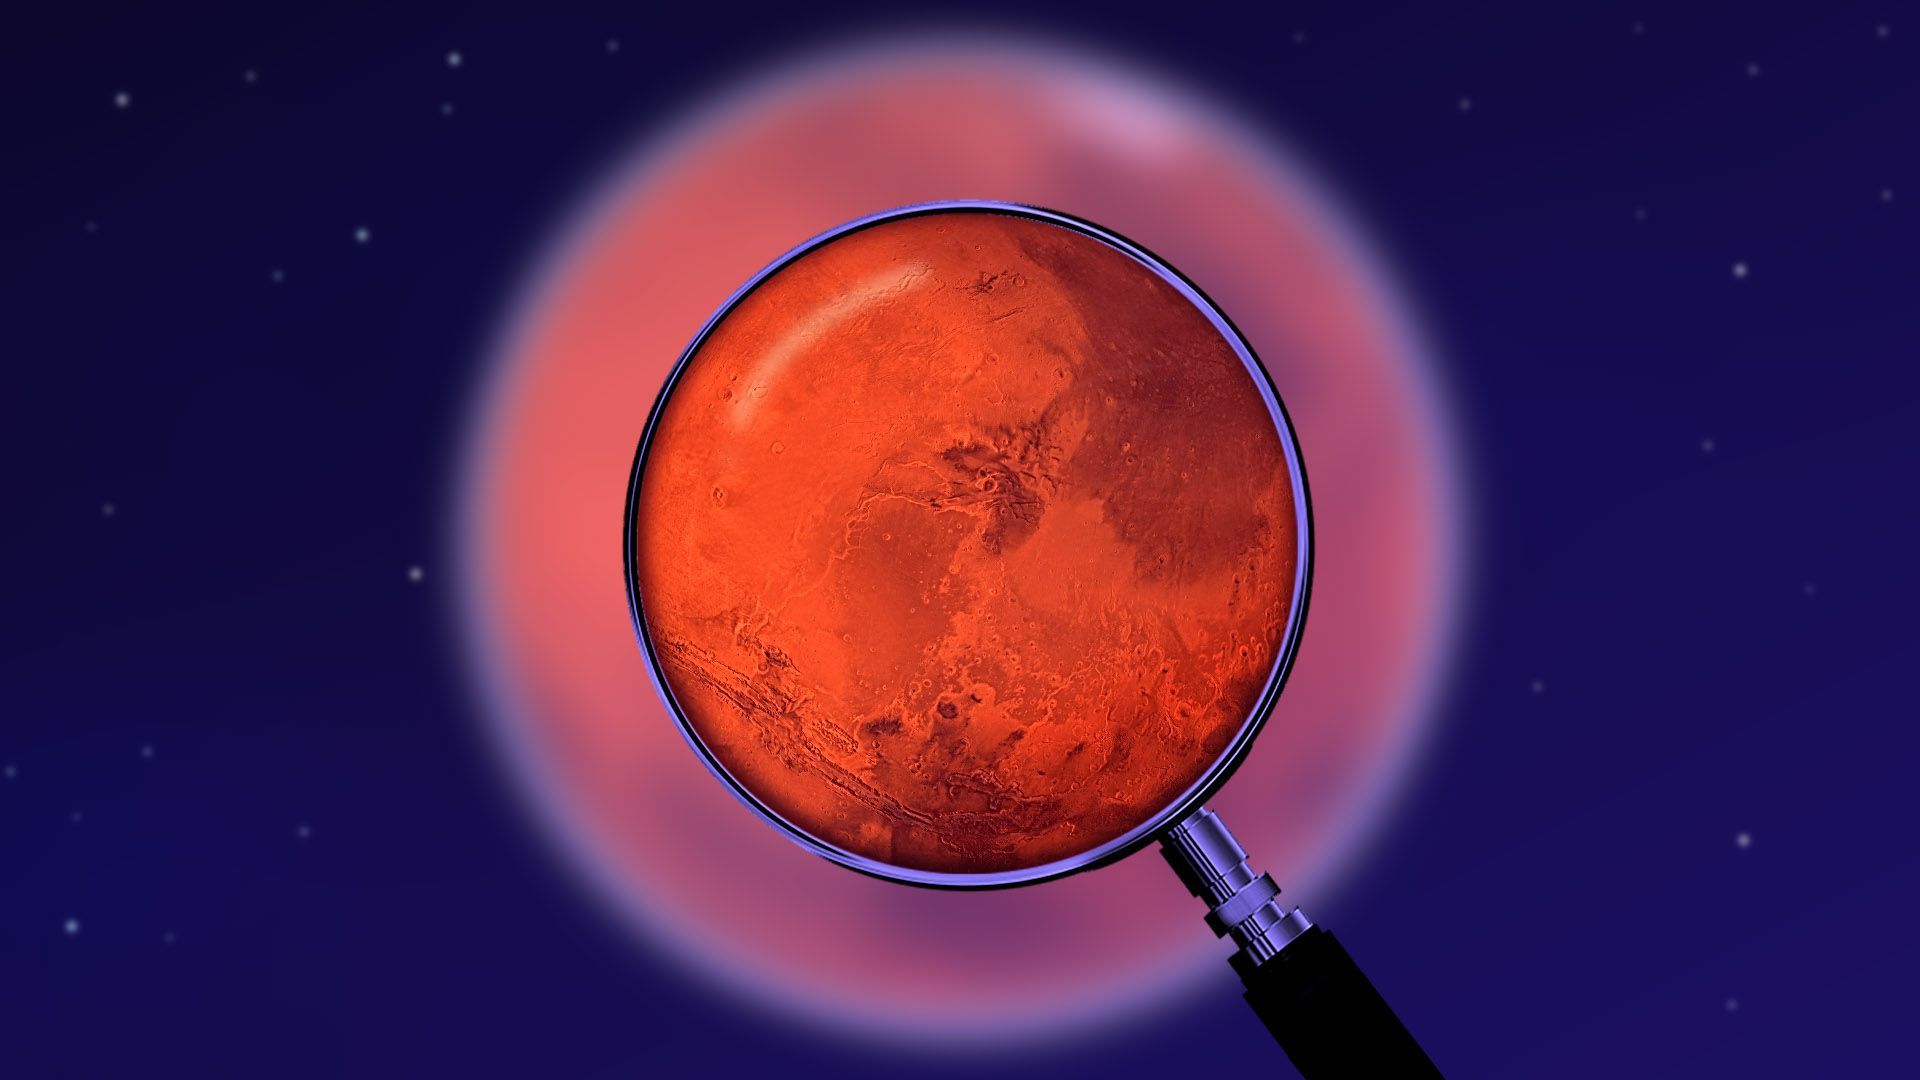 Illustration of a magnifying glass showing a focused section of an otherwise blurry Mars